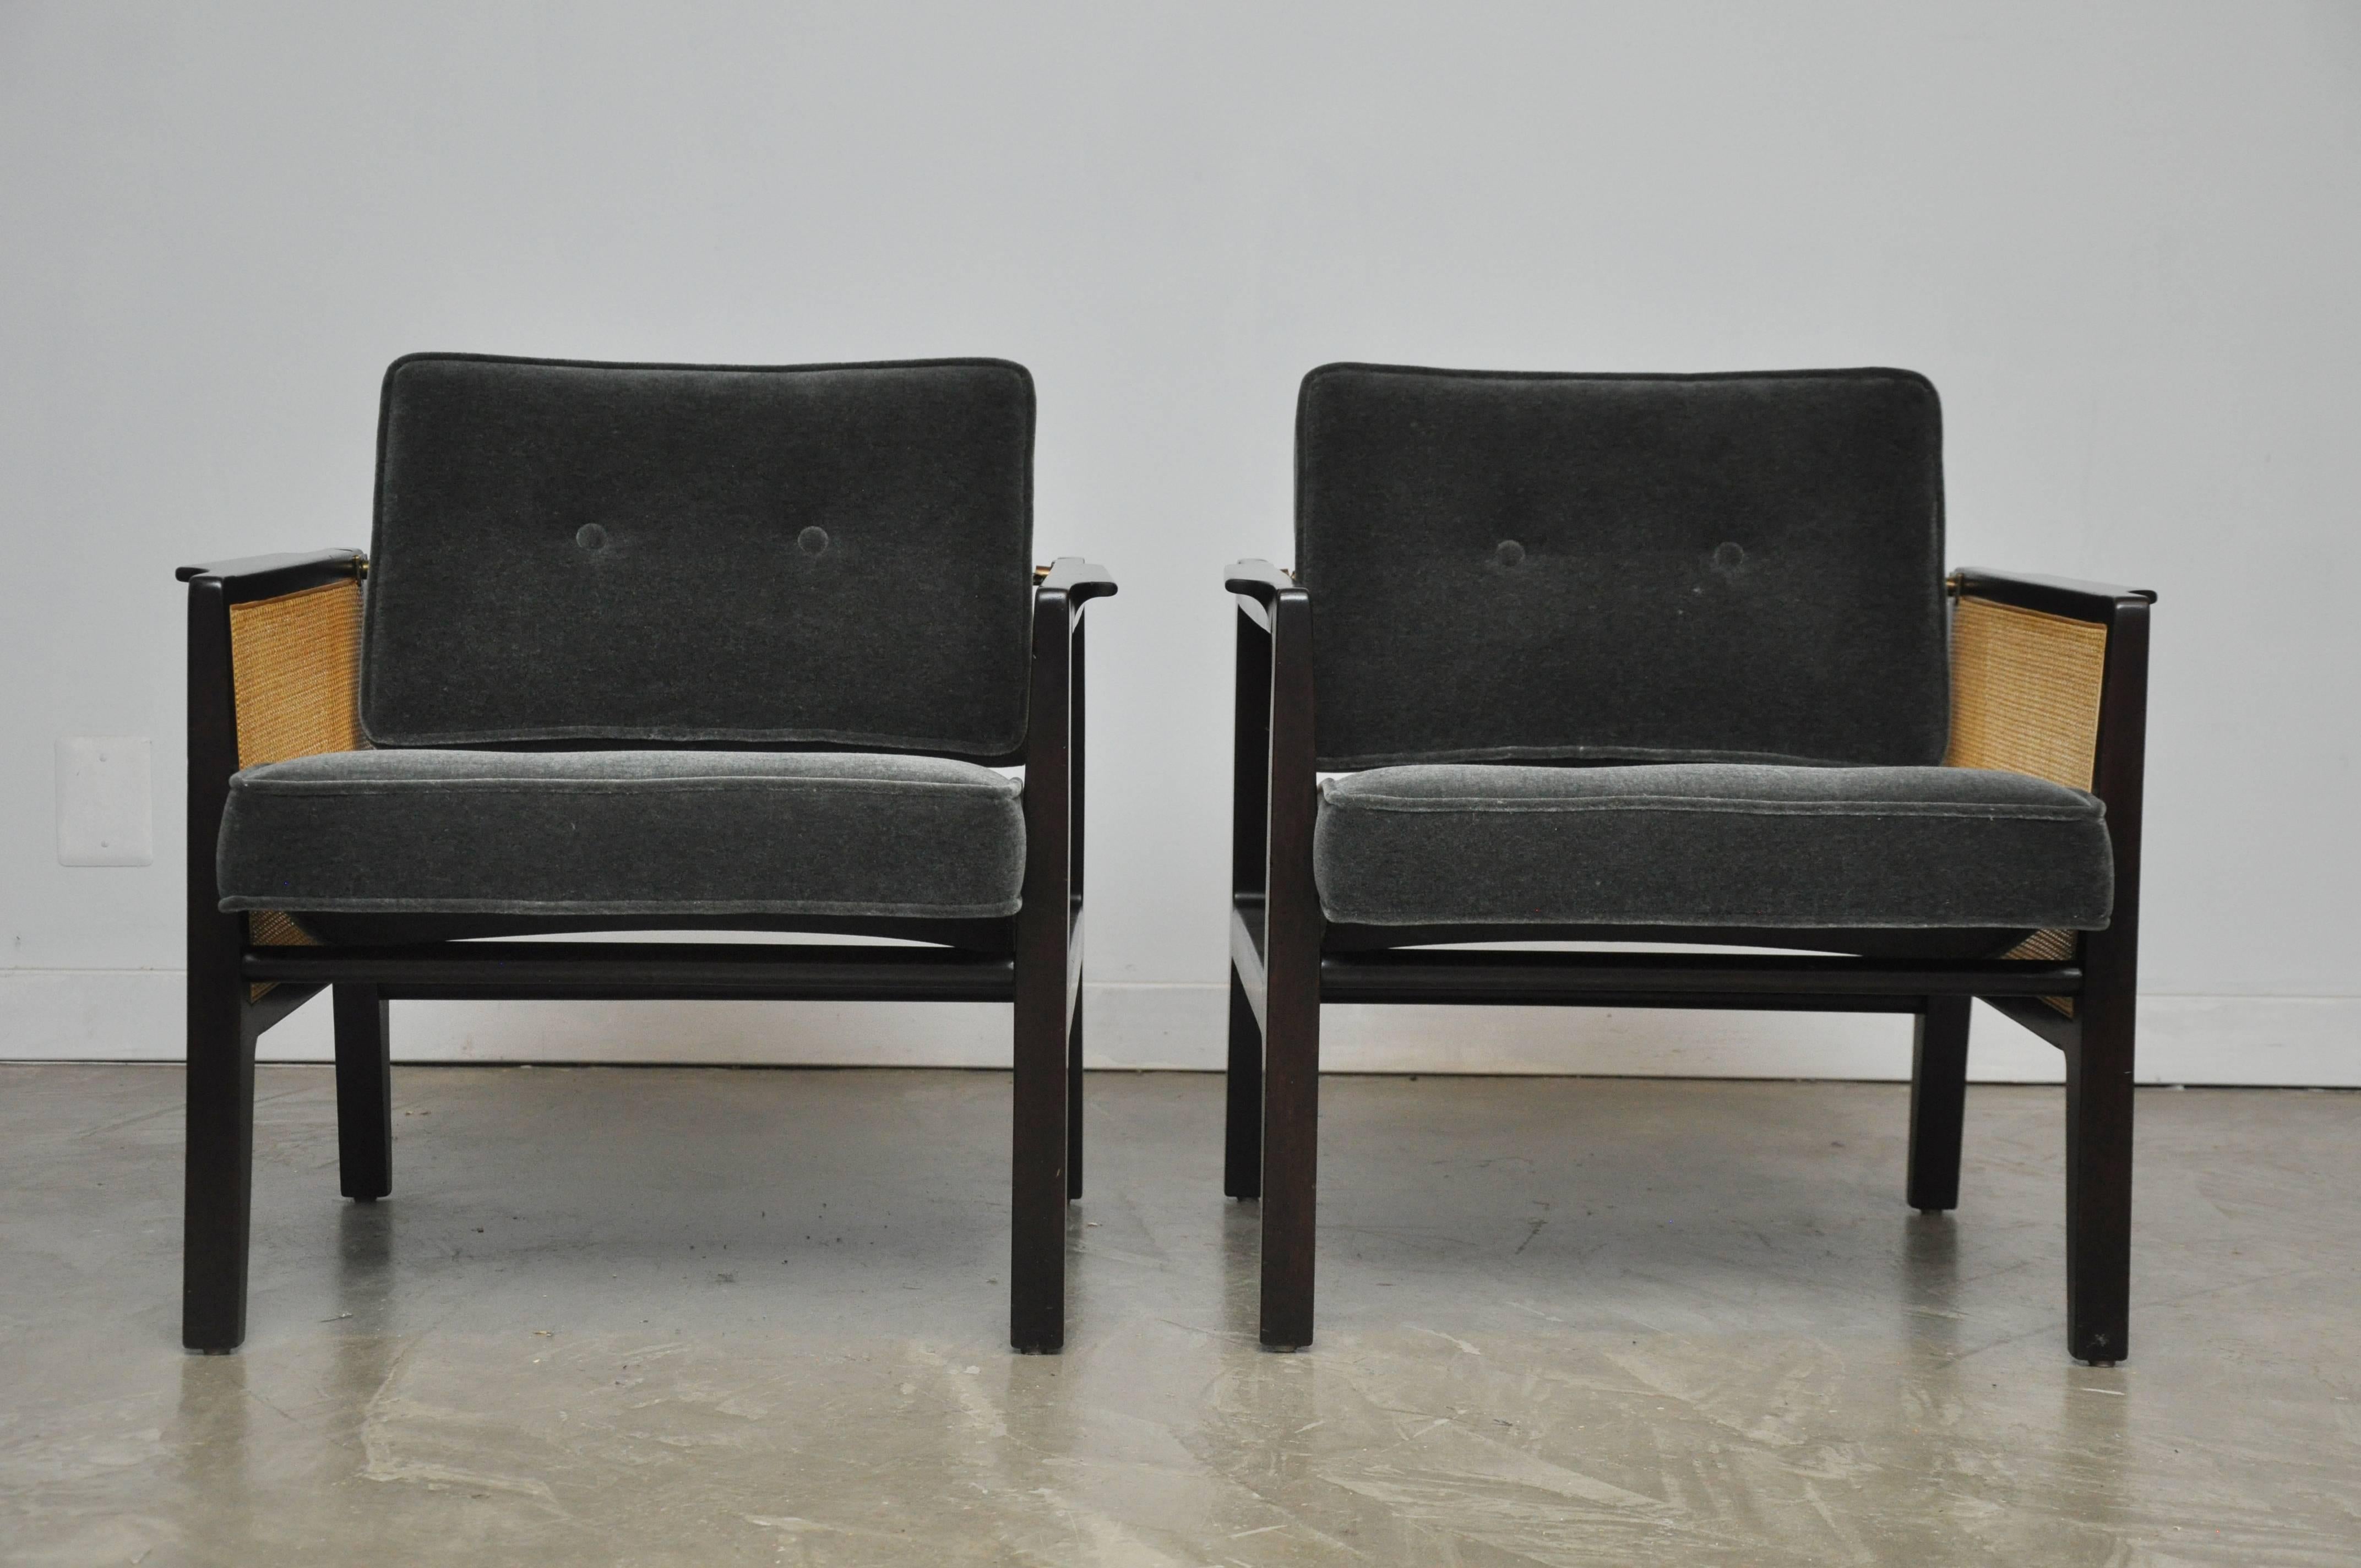 Beautiful cane sided lounge chairs by Edward Wormley for Dunbar. Model 5513, circa 1950s. Fully restored espresso finish frames with new cane and charcoal mohair upholstery. Back cushions have brass pivots to adjust for comfort.